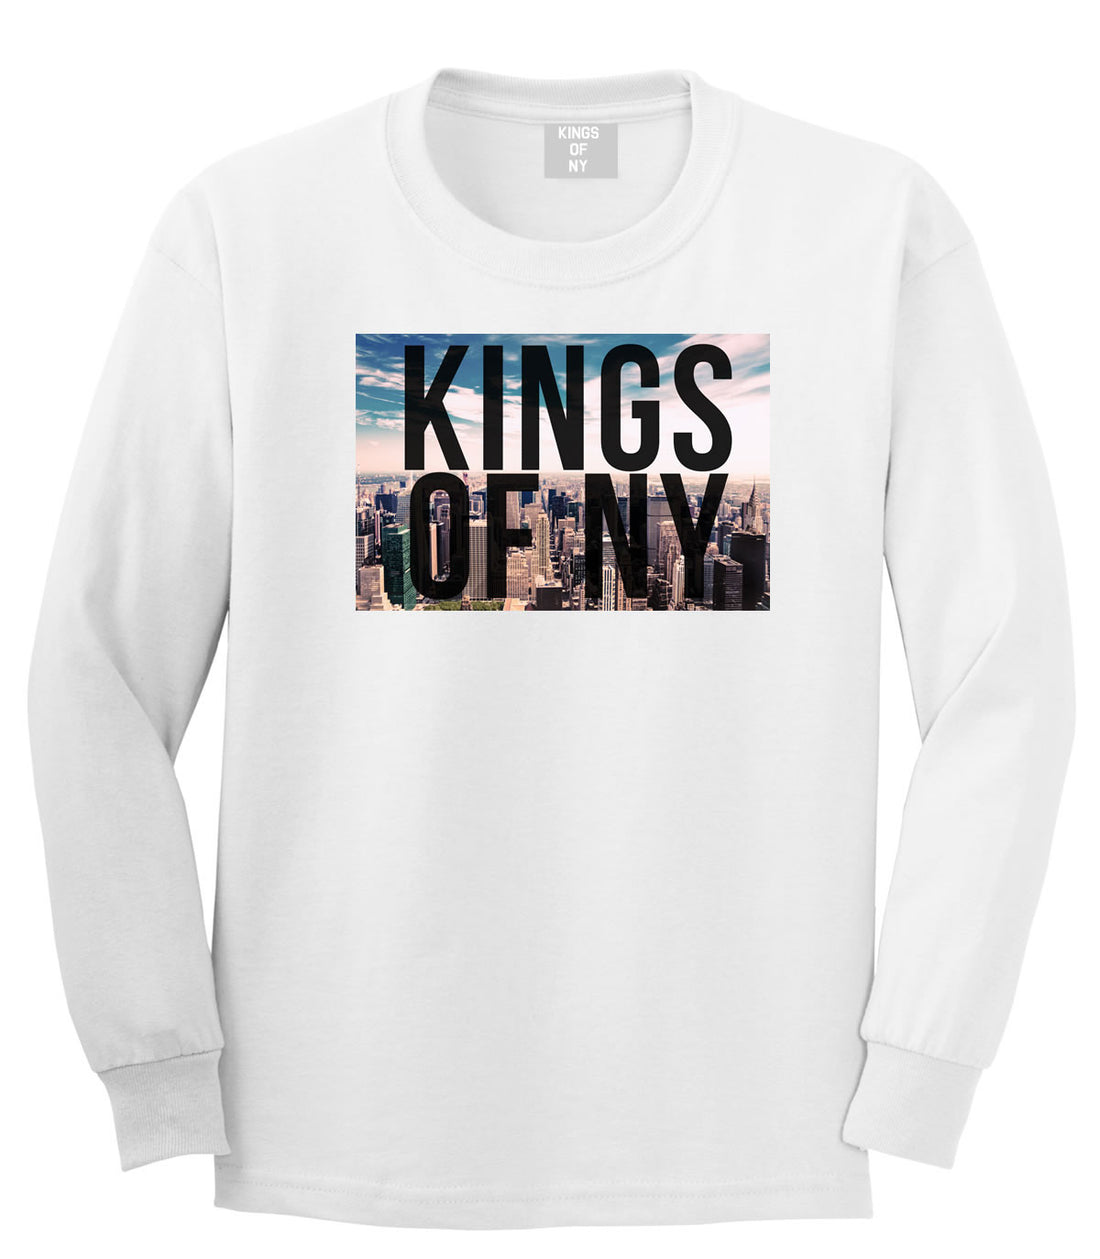 New York Skyline Boys Kids Long Sleeve T-Shirt in White by Kings Of NY